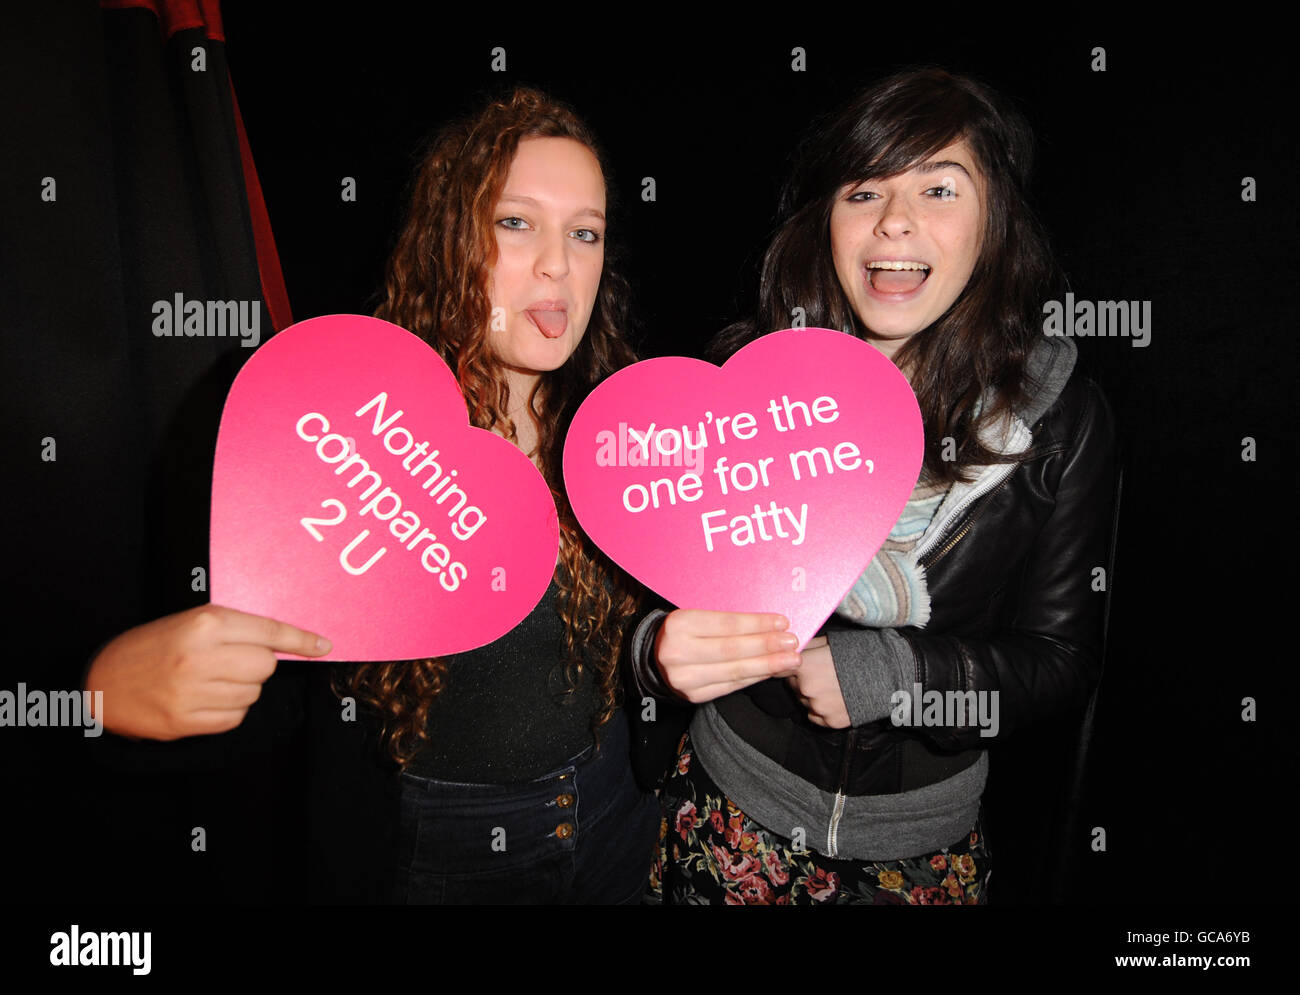 Danni Goodwin (left) aged 15 and friend Hannah Clarke aged 15 from London pose for a photo inside the Valentines Love Shack photo booth at HMV Oxford Street in central London. PRESS ASSOCIATION Photo. Picture date: Saturday February 13, 2010. HMV customers were invited to take free photos of themselves and with their partners holding a romantic message of love on a heart shaped board. Each message takes its theme from a famous love song. Photo credit should read: Zak Hussein/PA Wire Stock Photo